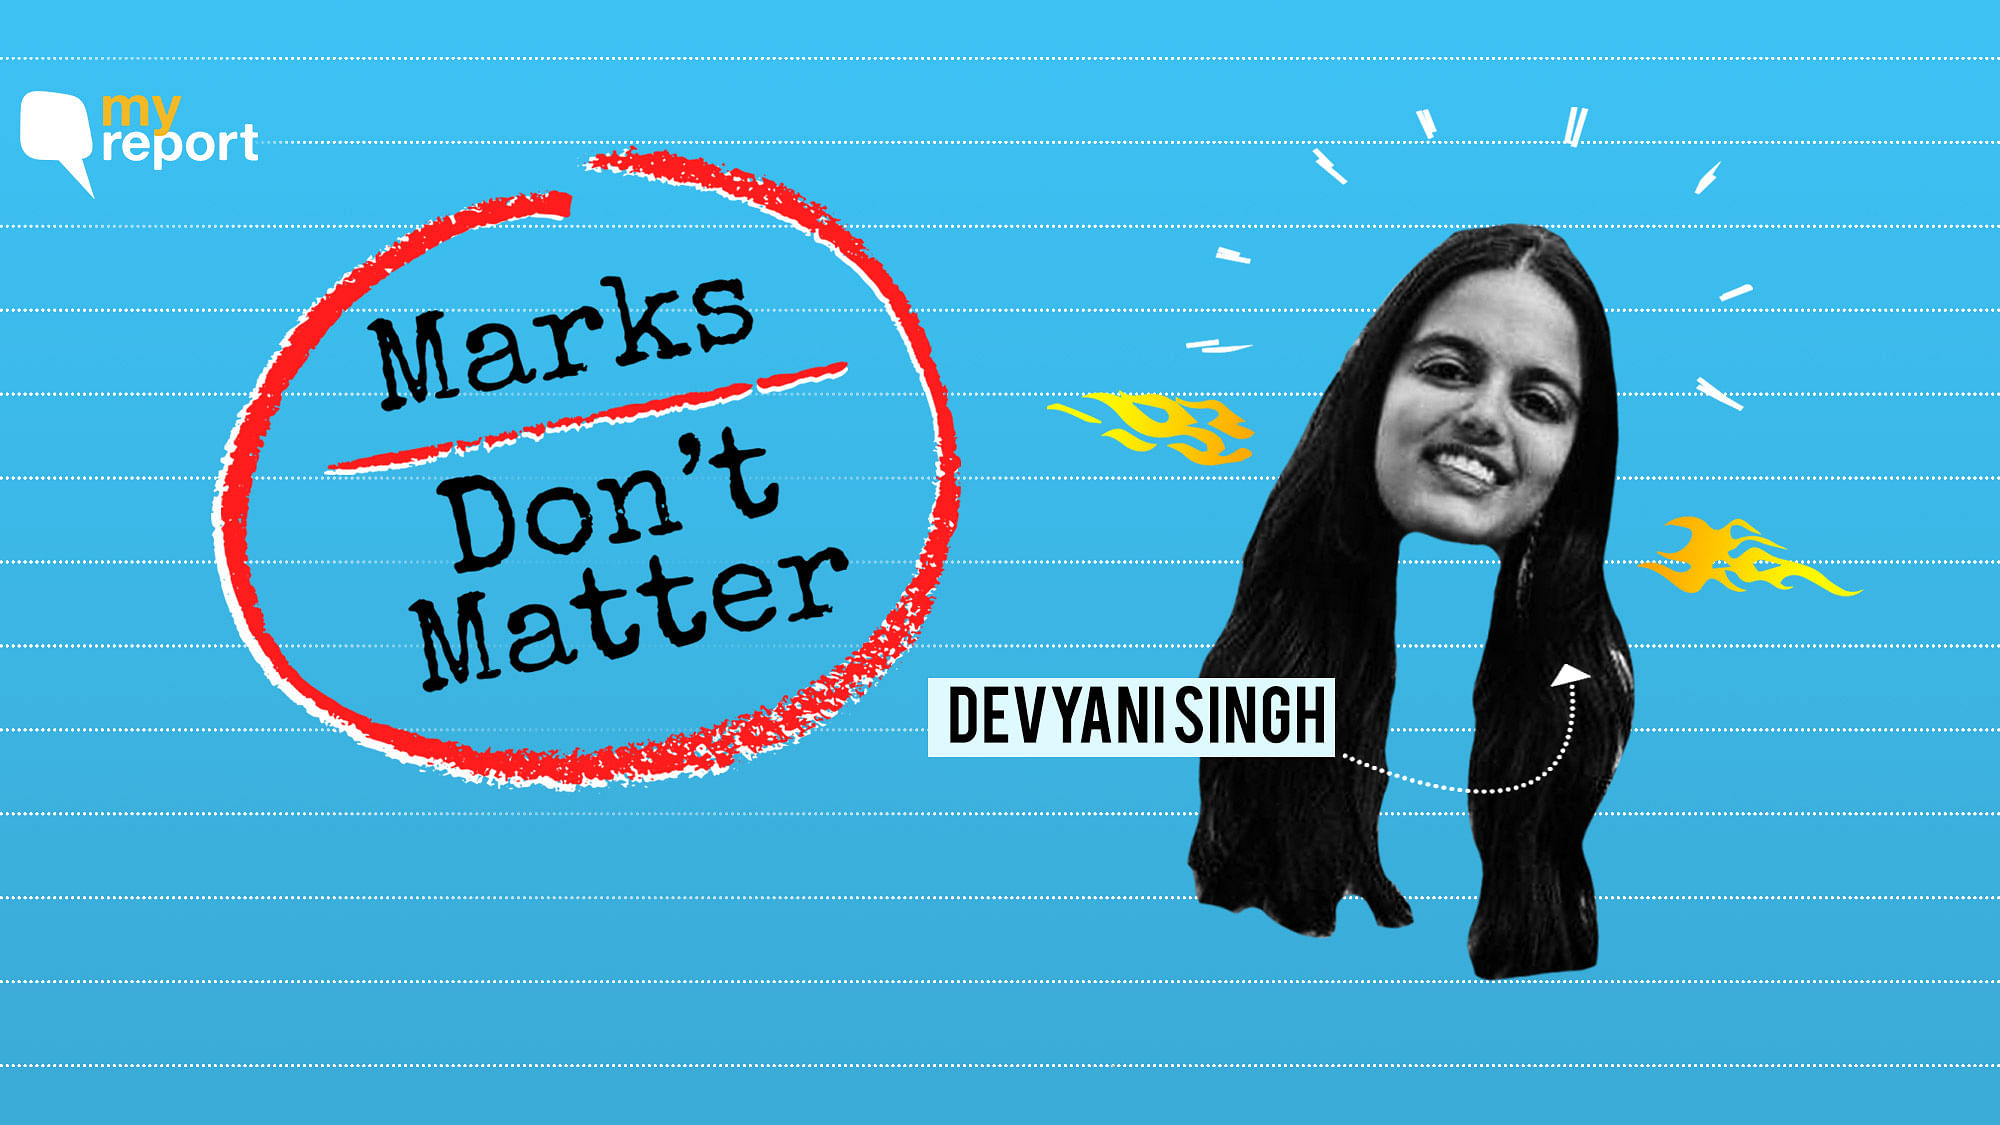 Nowadays, there is immense importance given to Board exams, but do marks actually matter in the long run?